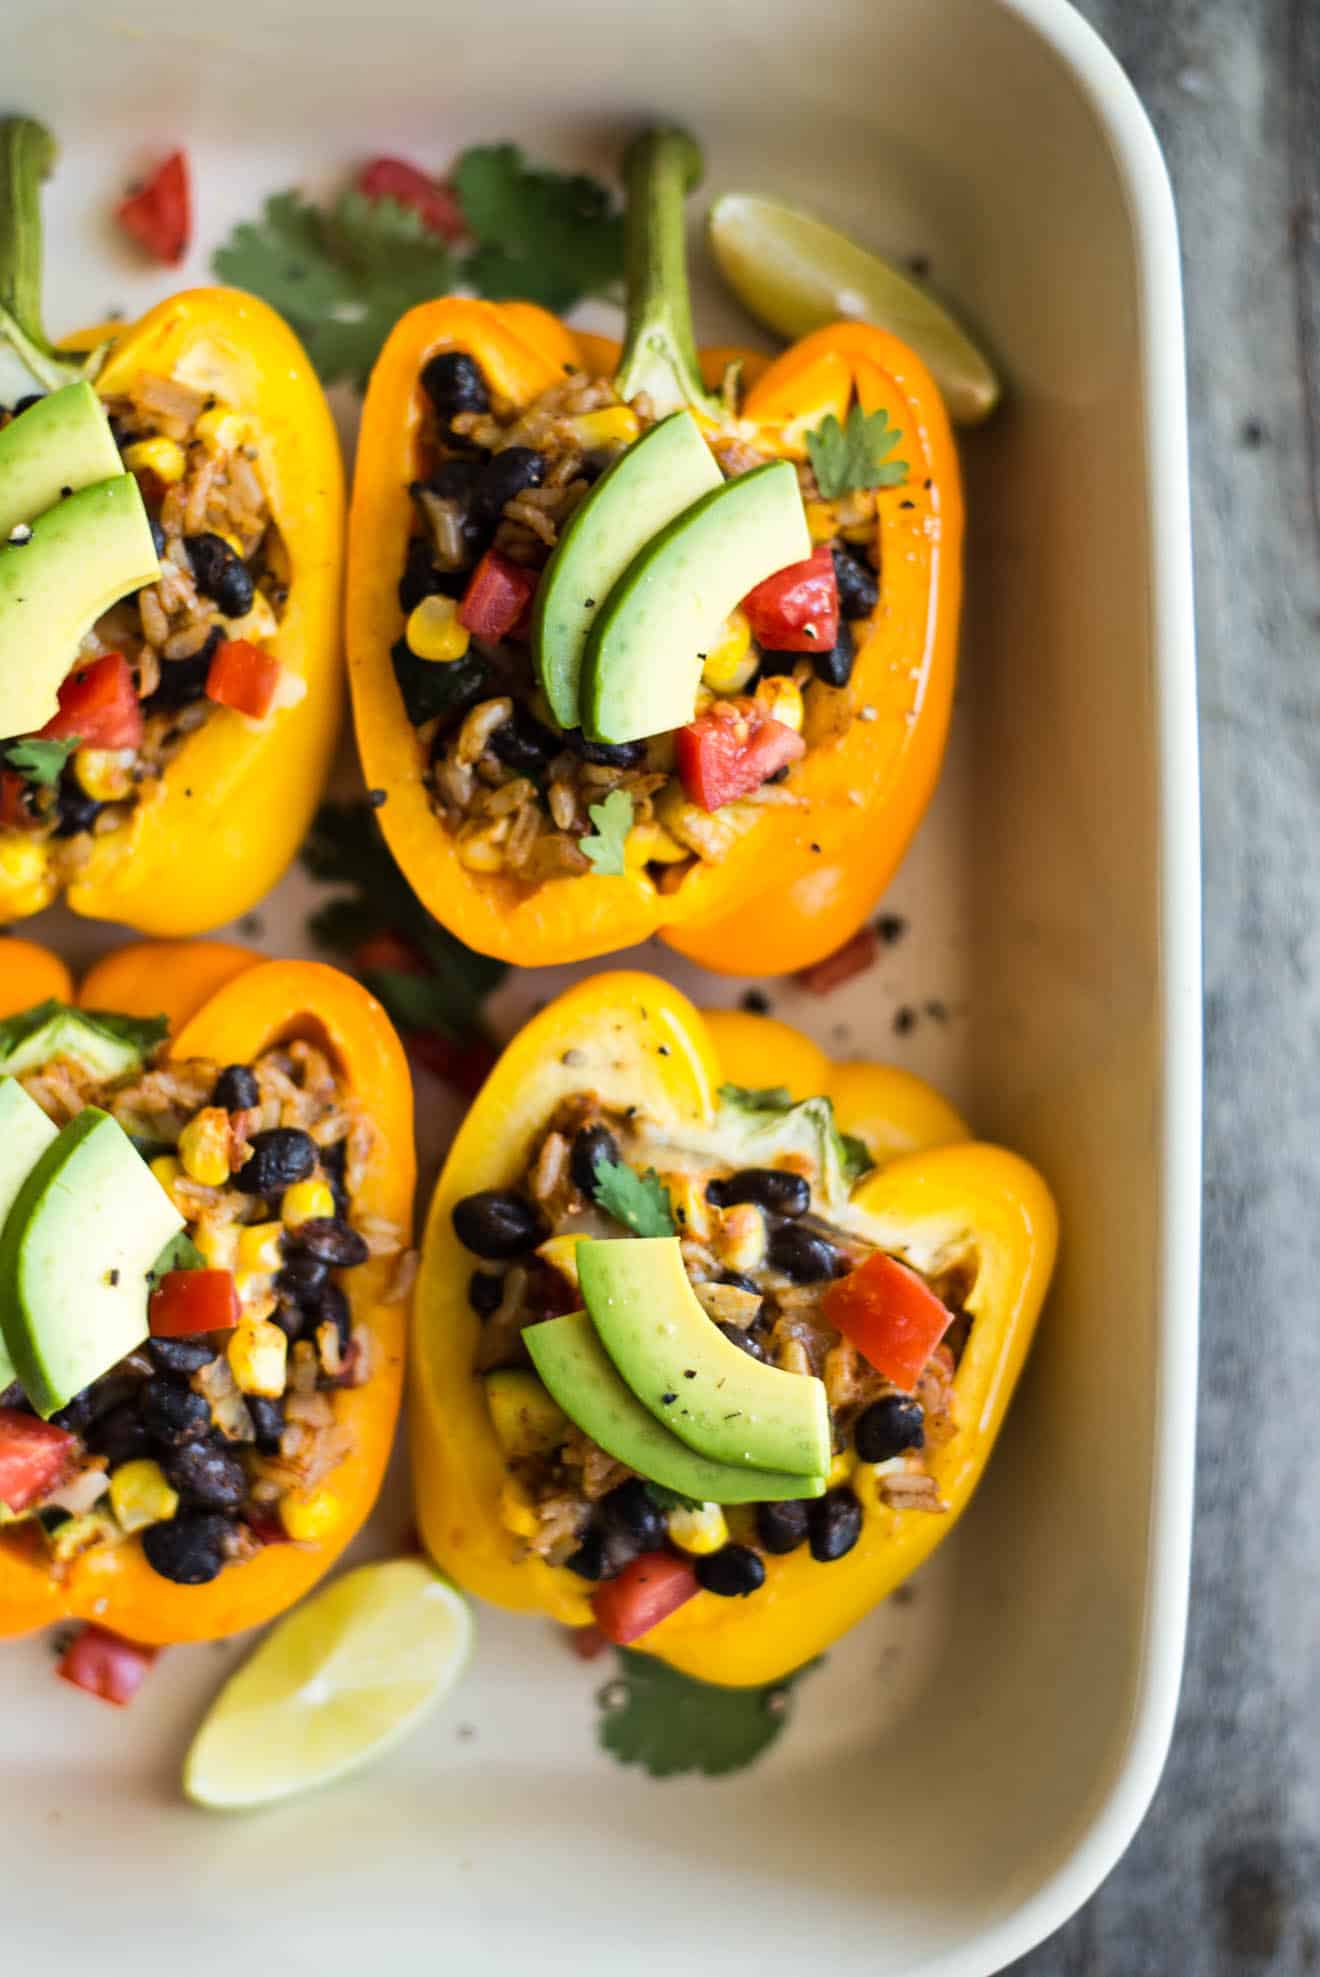 Beans and Rice Stuffed Peppers - a healthy, gluten-free dinner that is ready in 45 minutes. (409 calories per serving) by @healthynibs